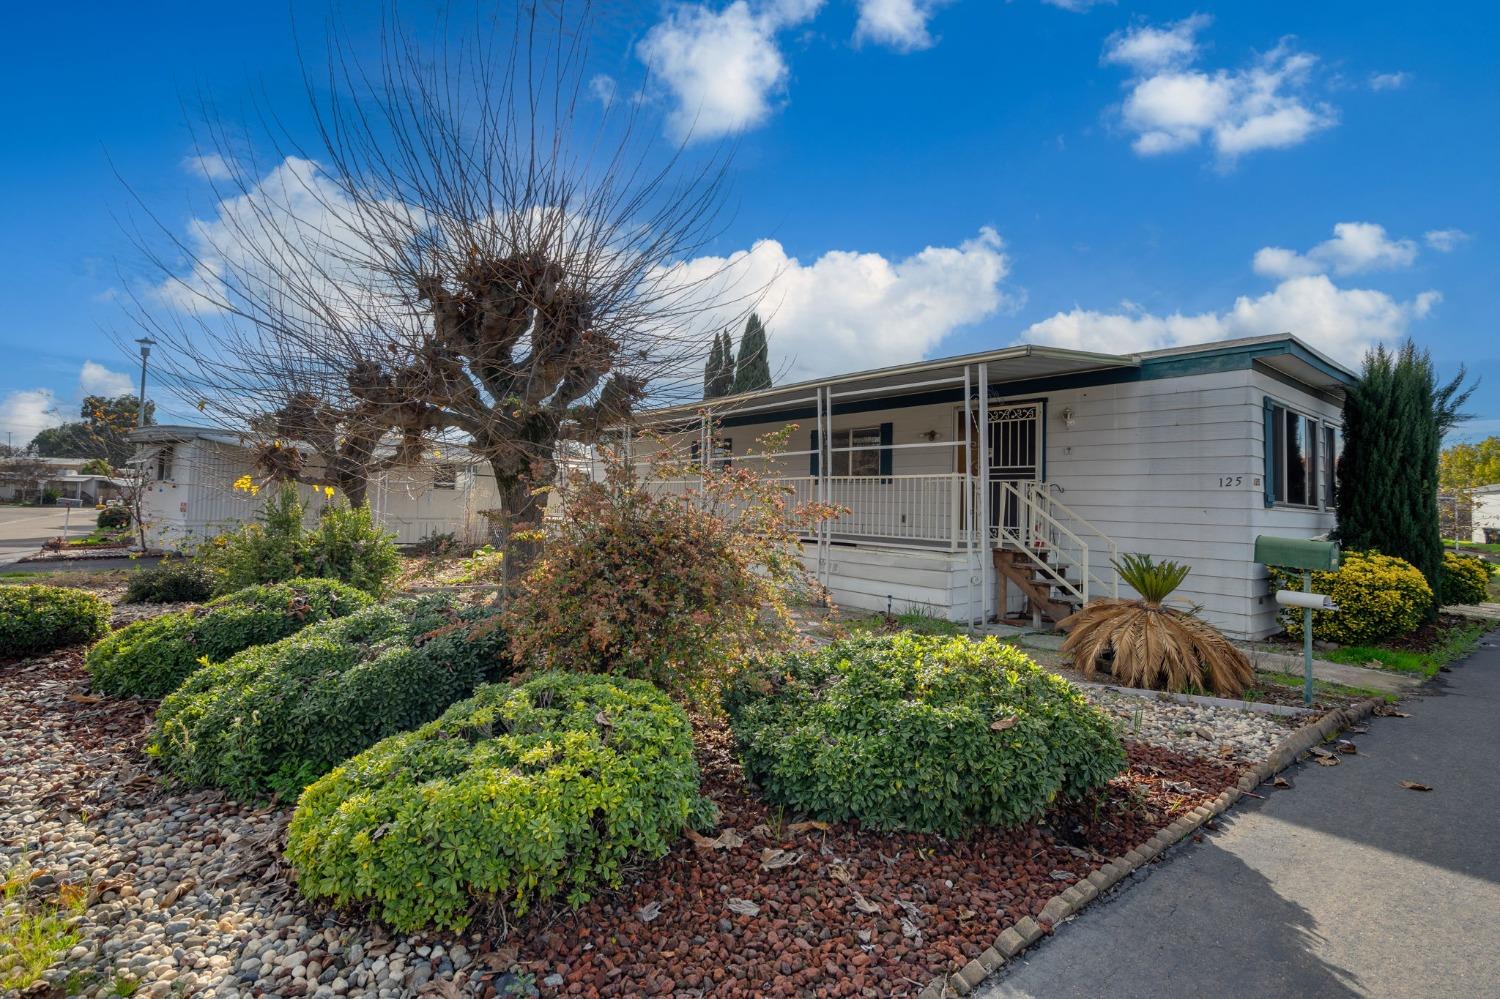 Photo of 125 Burlingame Ave in Citrus Heights, CA